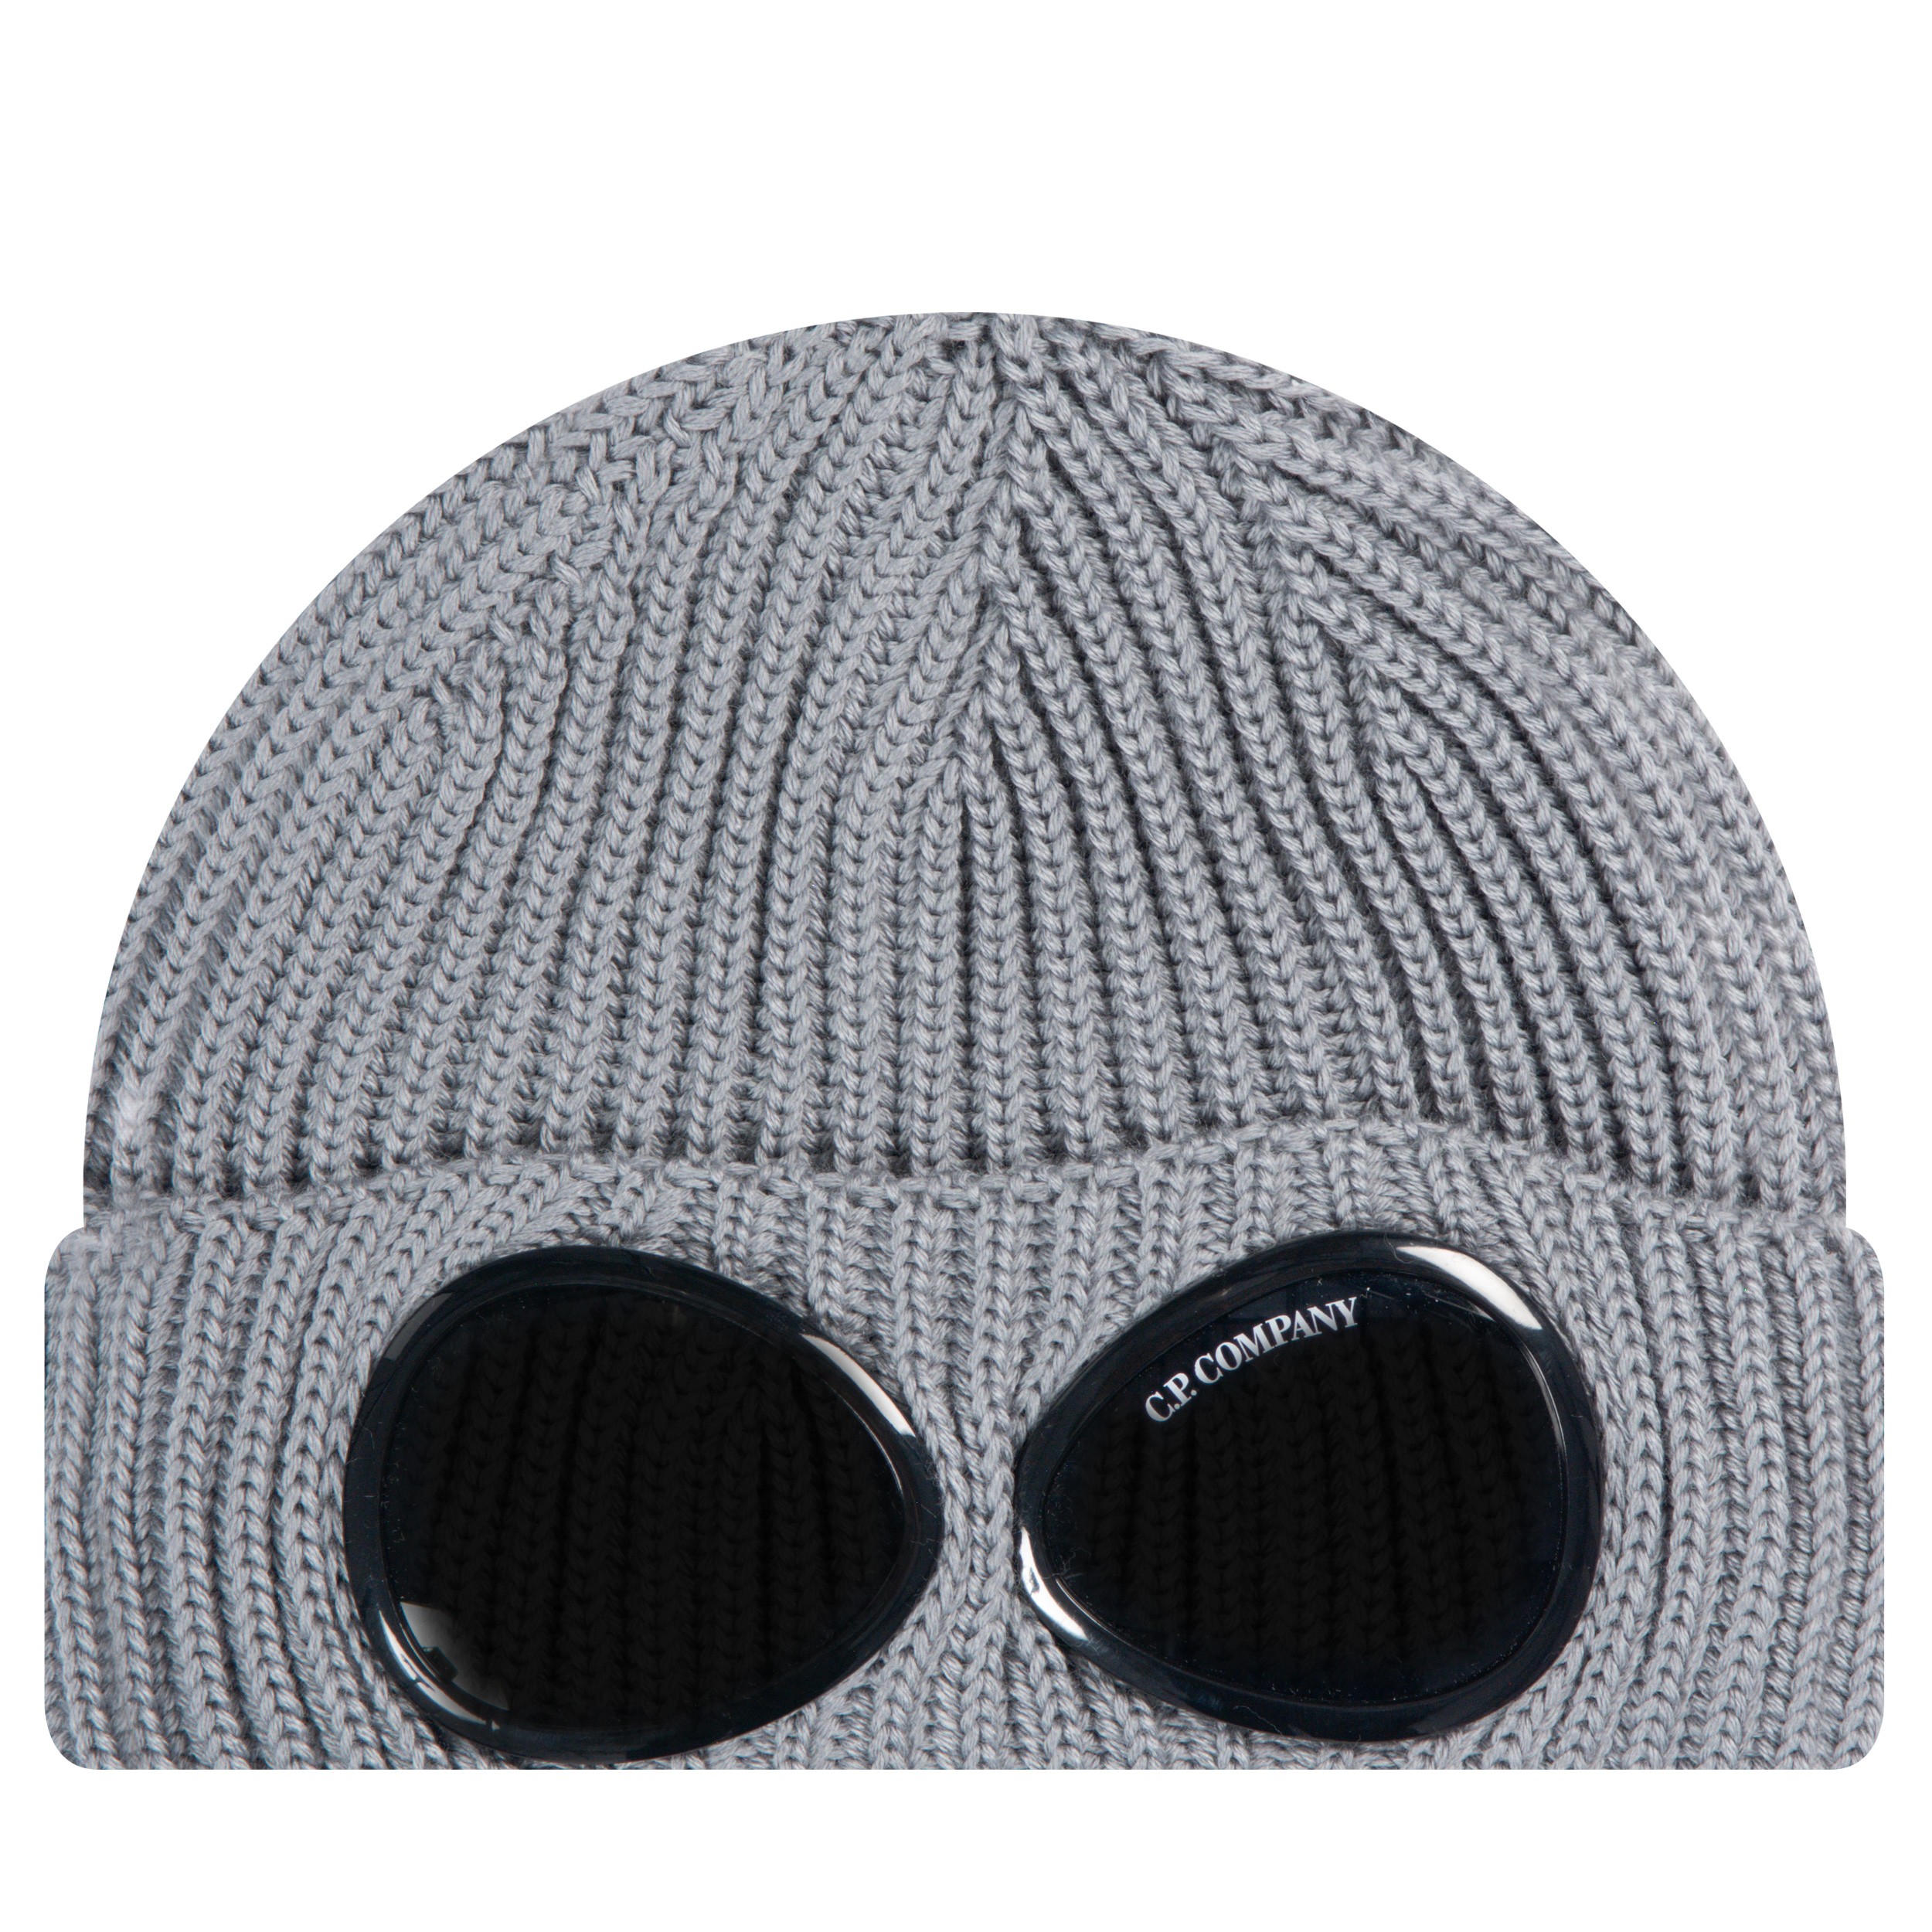 CP Company 'Cotton Knit' Double Goggle Beanie Grey